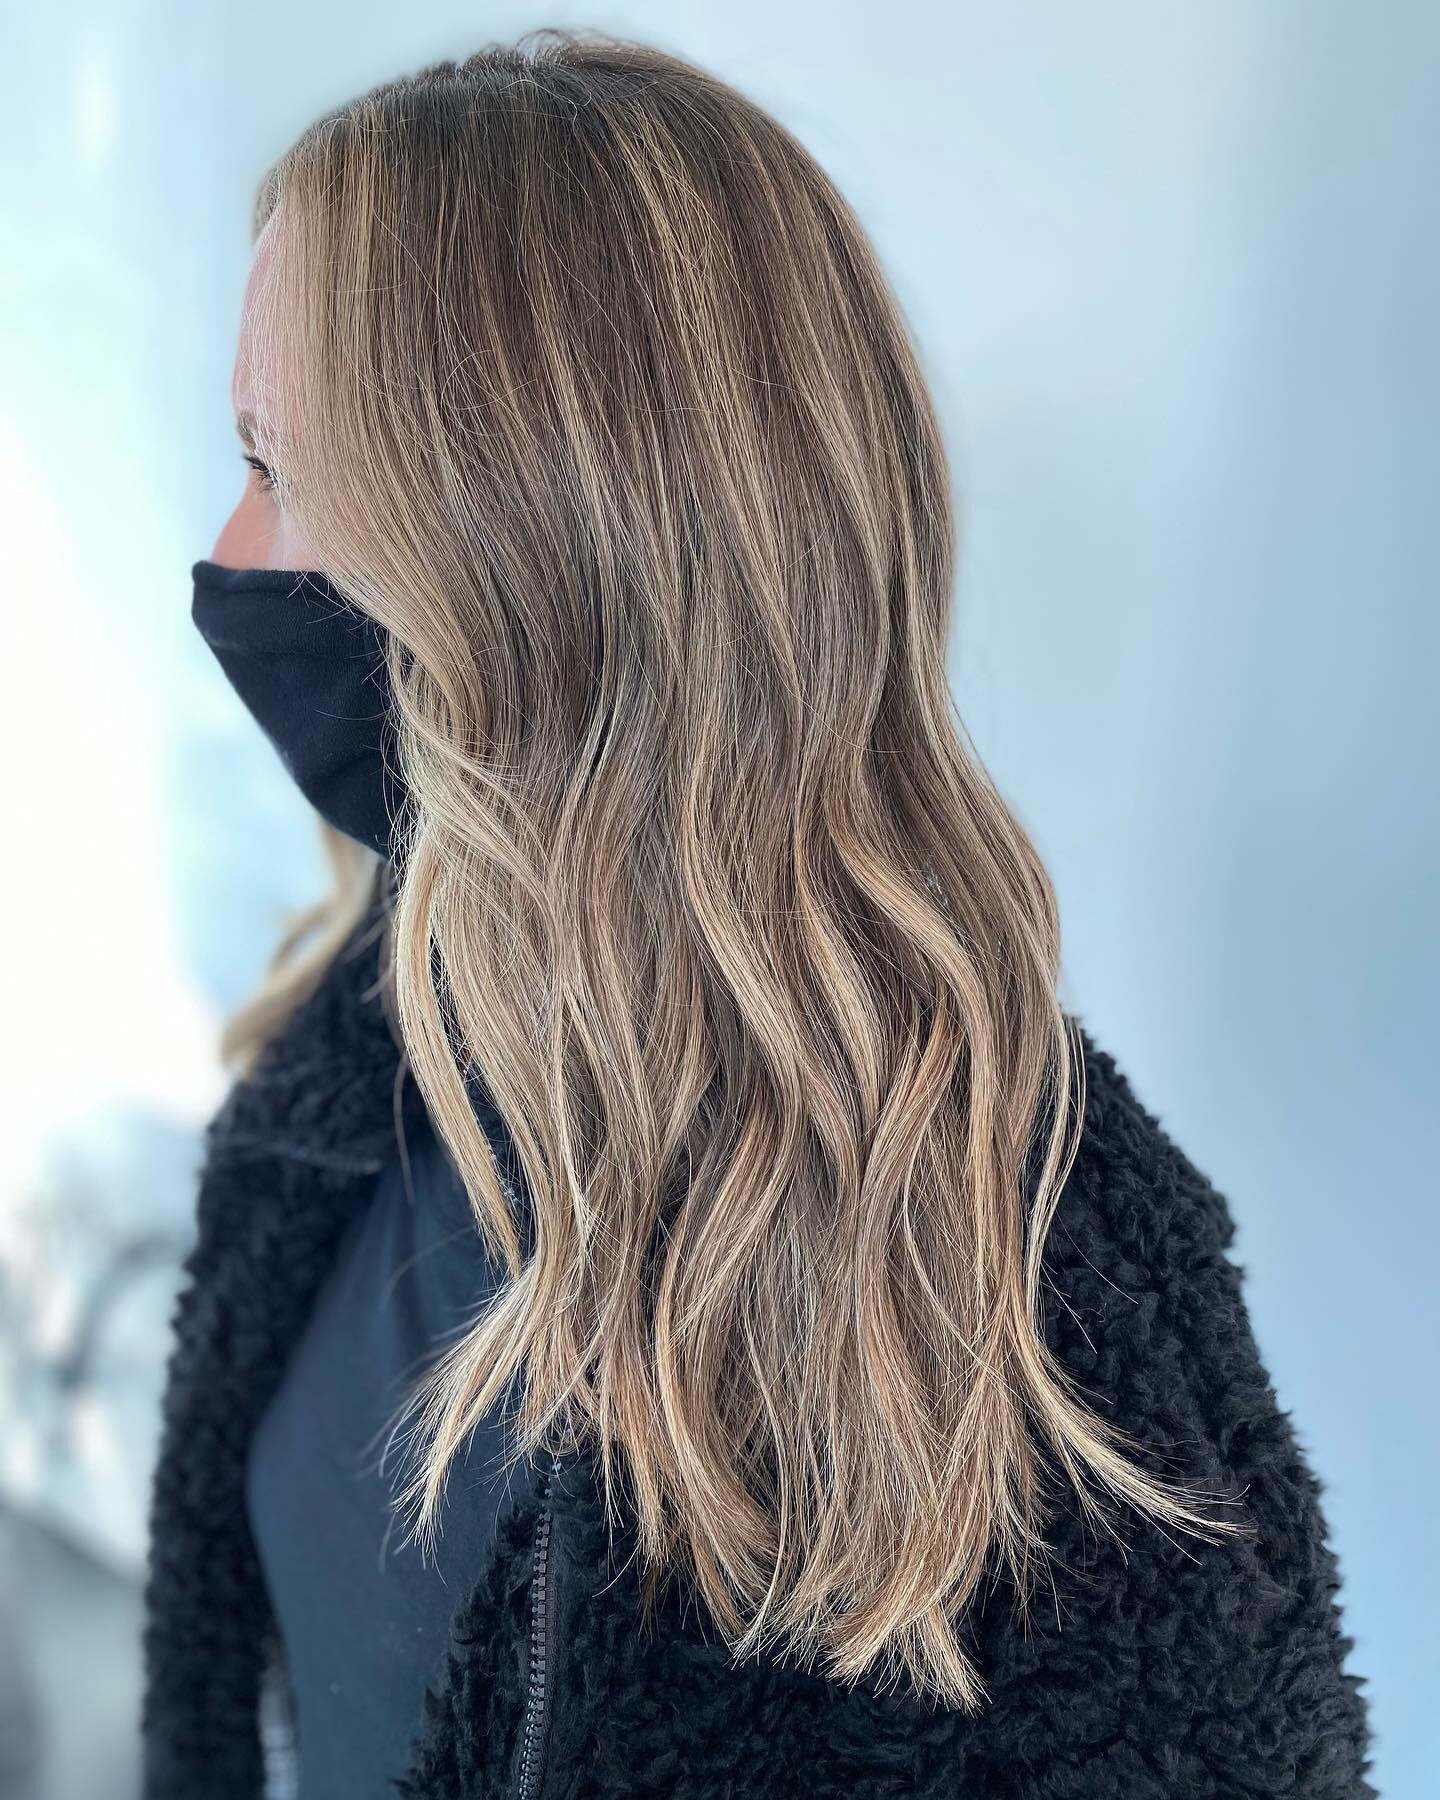 Lived in hair dreams!  Now booking for March appointments! Link in bio or DM for consultation &bull;
&bull;
&bull;
&bull;
&bull;
&bull;
&bull;
&bull;
#hairbymackenziejacobs #hermosabeach #sunkissedhairstudio #hermosabeachhair #manhattanbeach #redondo